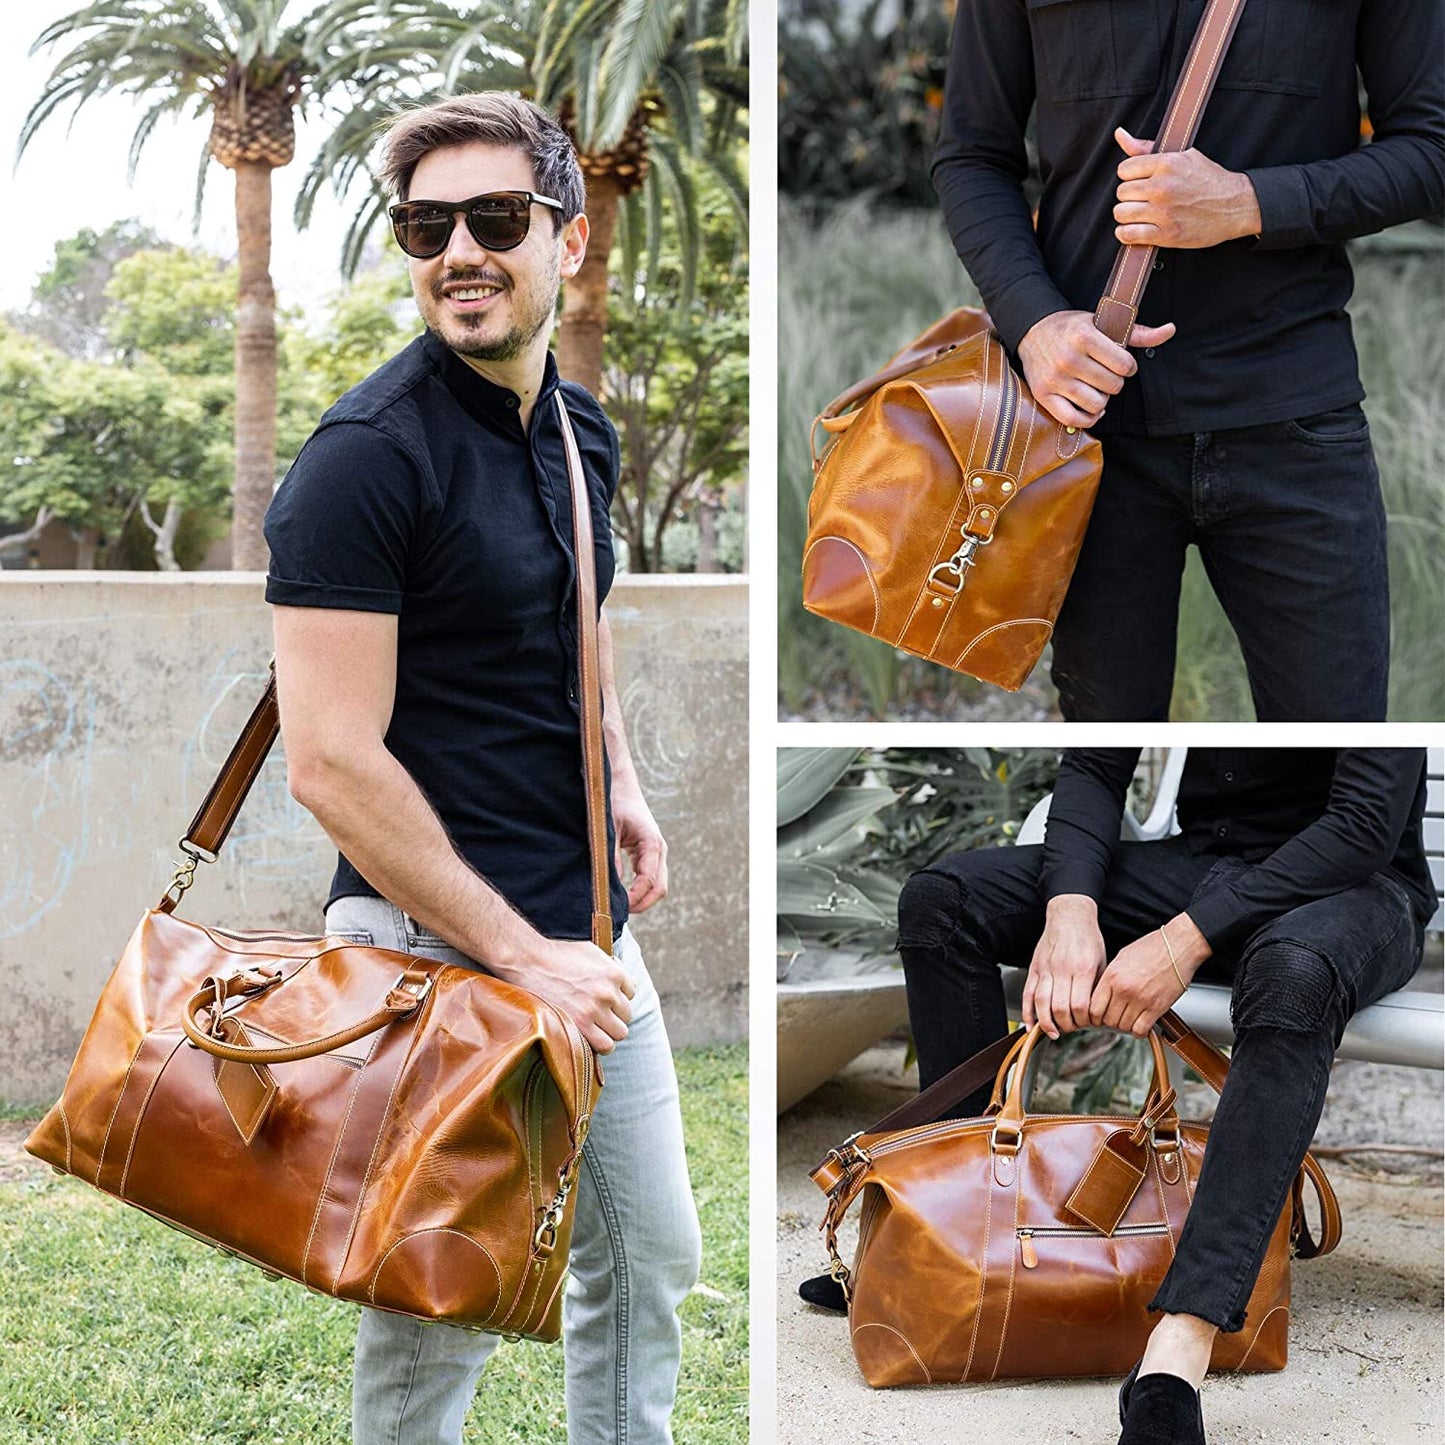 Genuine Leather Travel Duffel Bag | Oversized Weekend Luggage | Buffalo Leather Duffle Bag for Men / Women | Sports Gym Overnight Carry-On Bag | Great Gift Idea